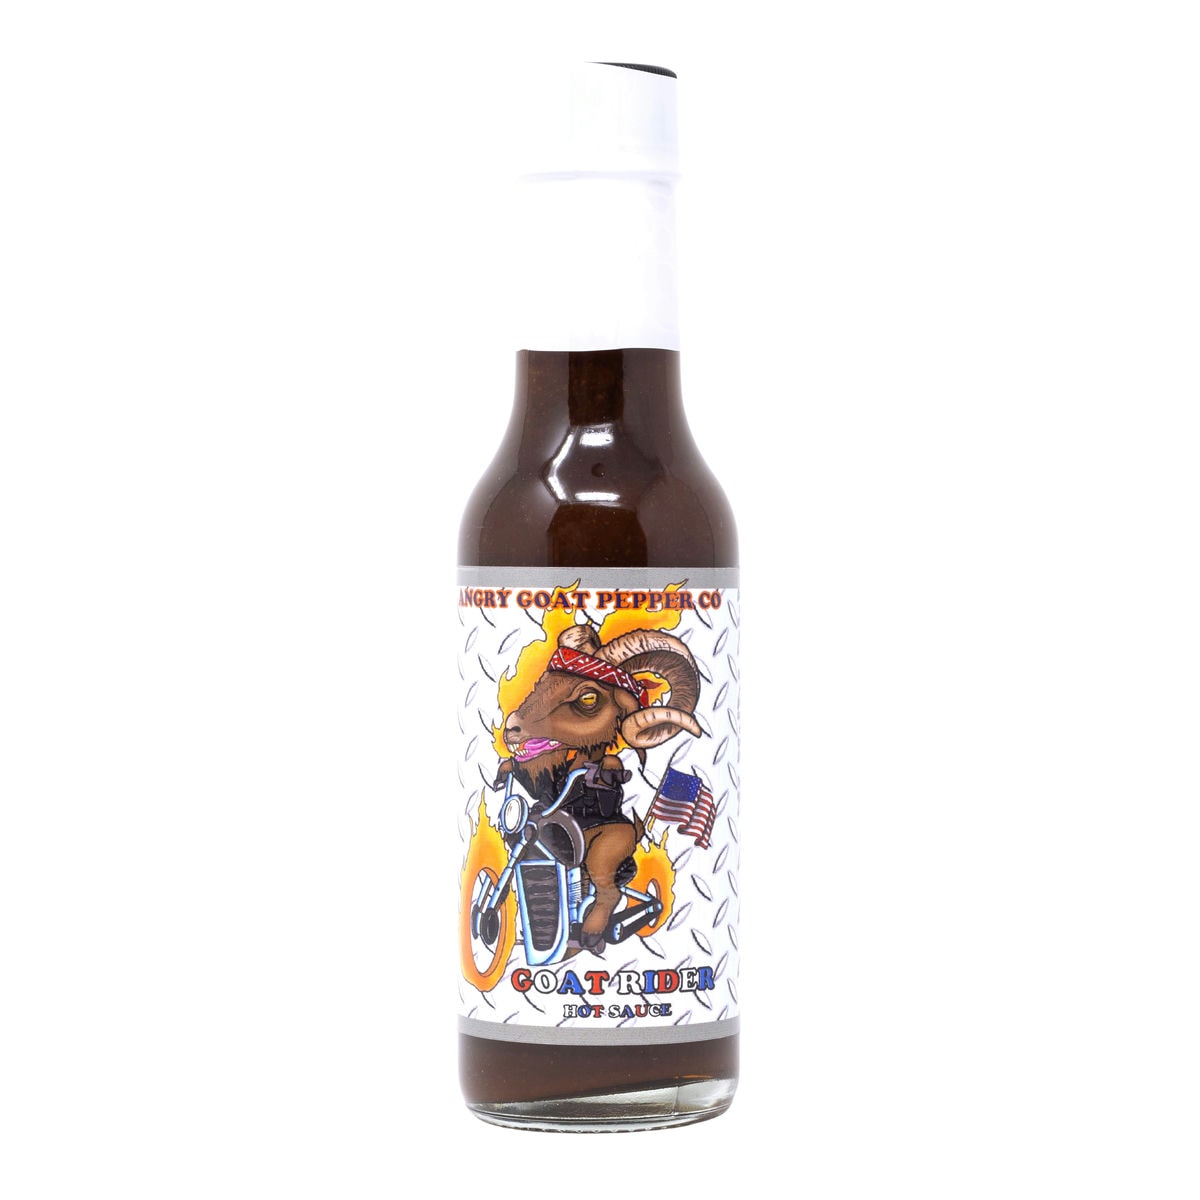 Angry Goat Co. Goat Rider Ghost Pepper Hot Sauce